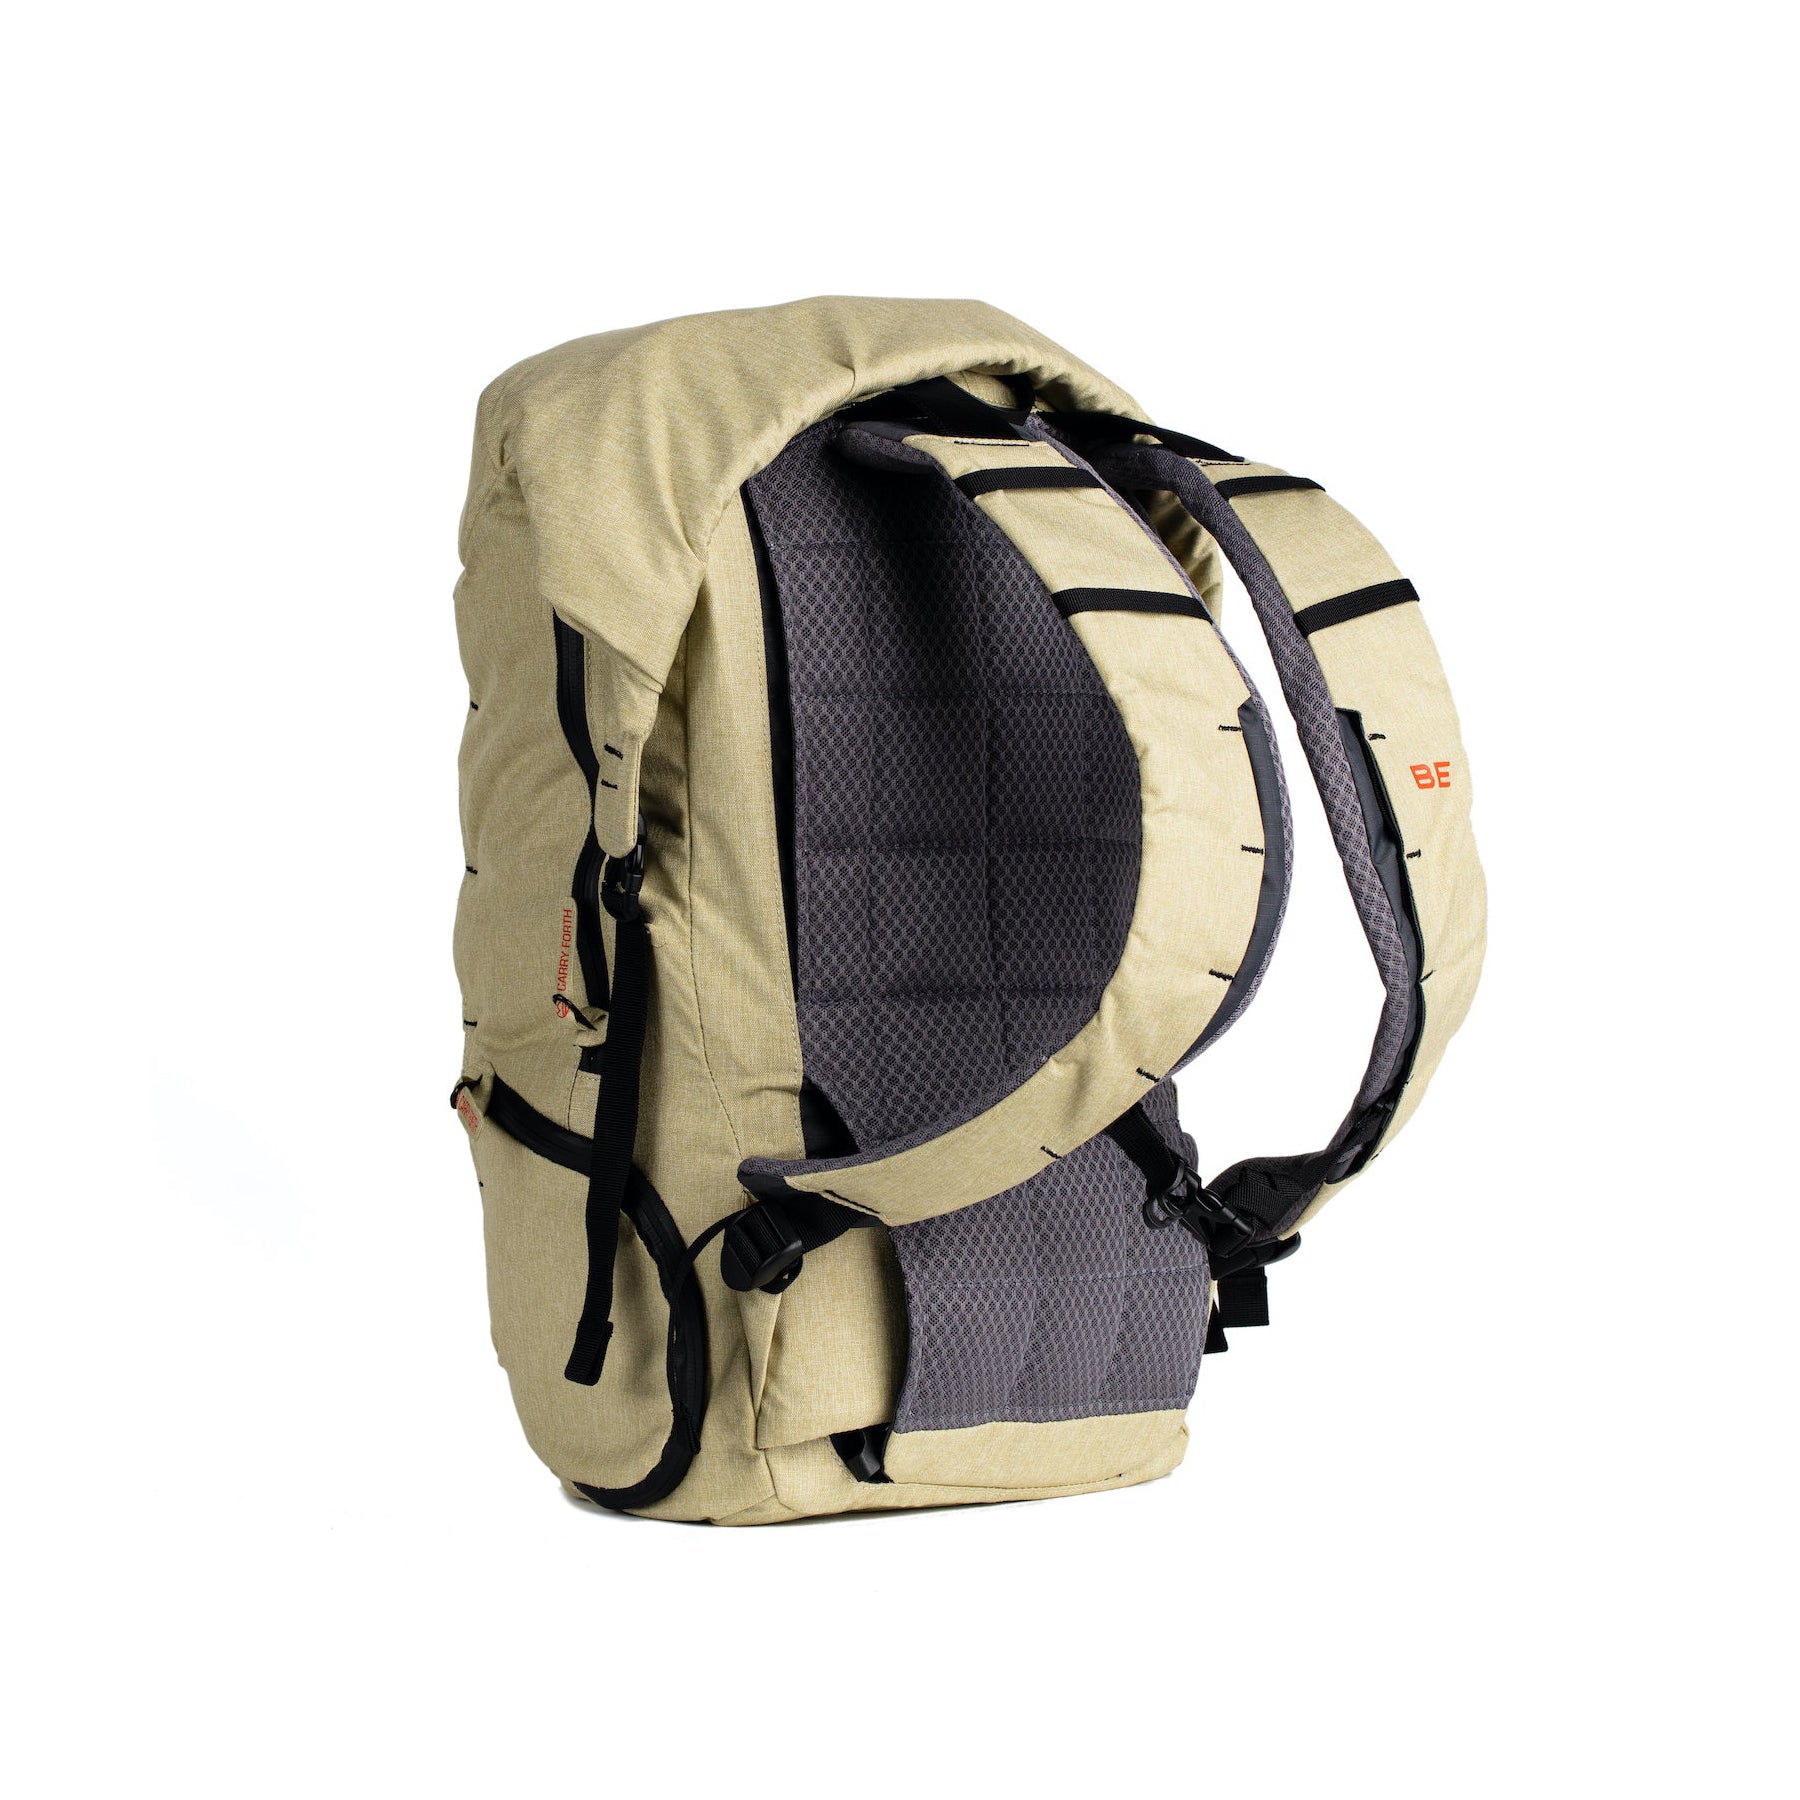 Back view of Sage Green Tahquitz 2.0 pack with shoulder straps